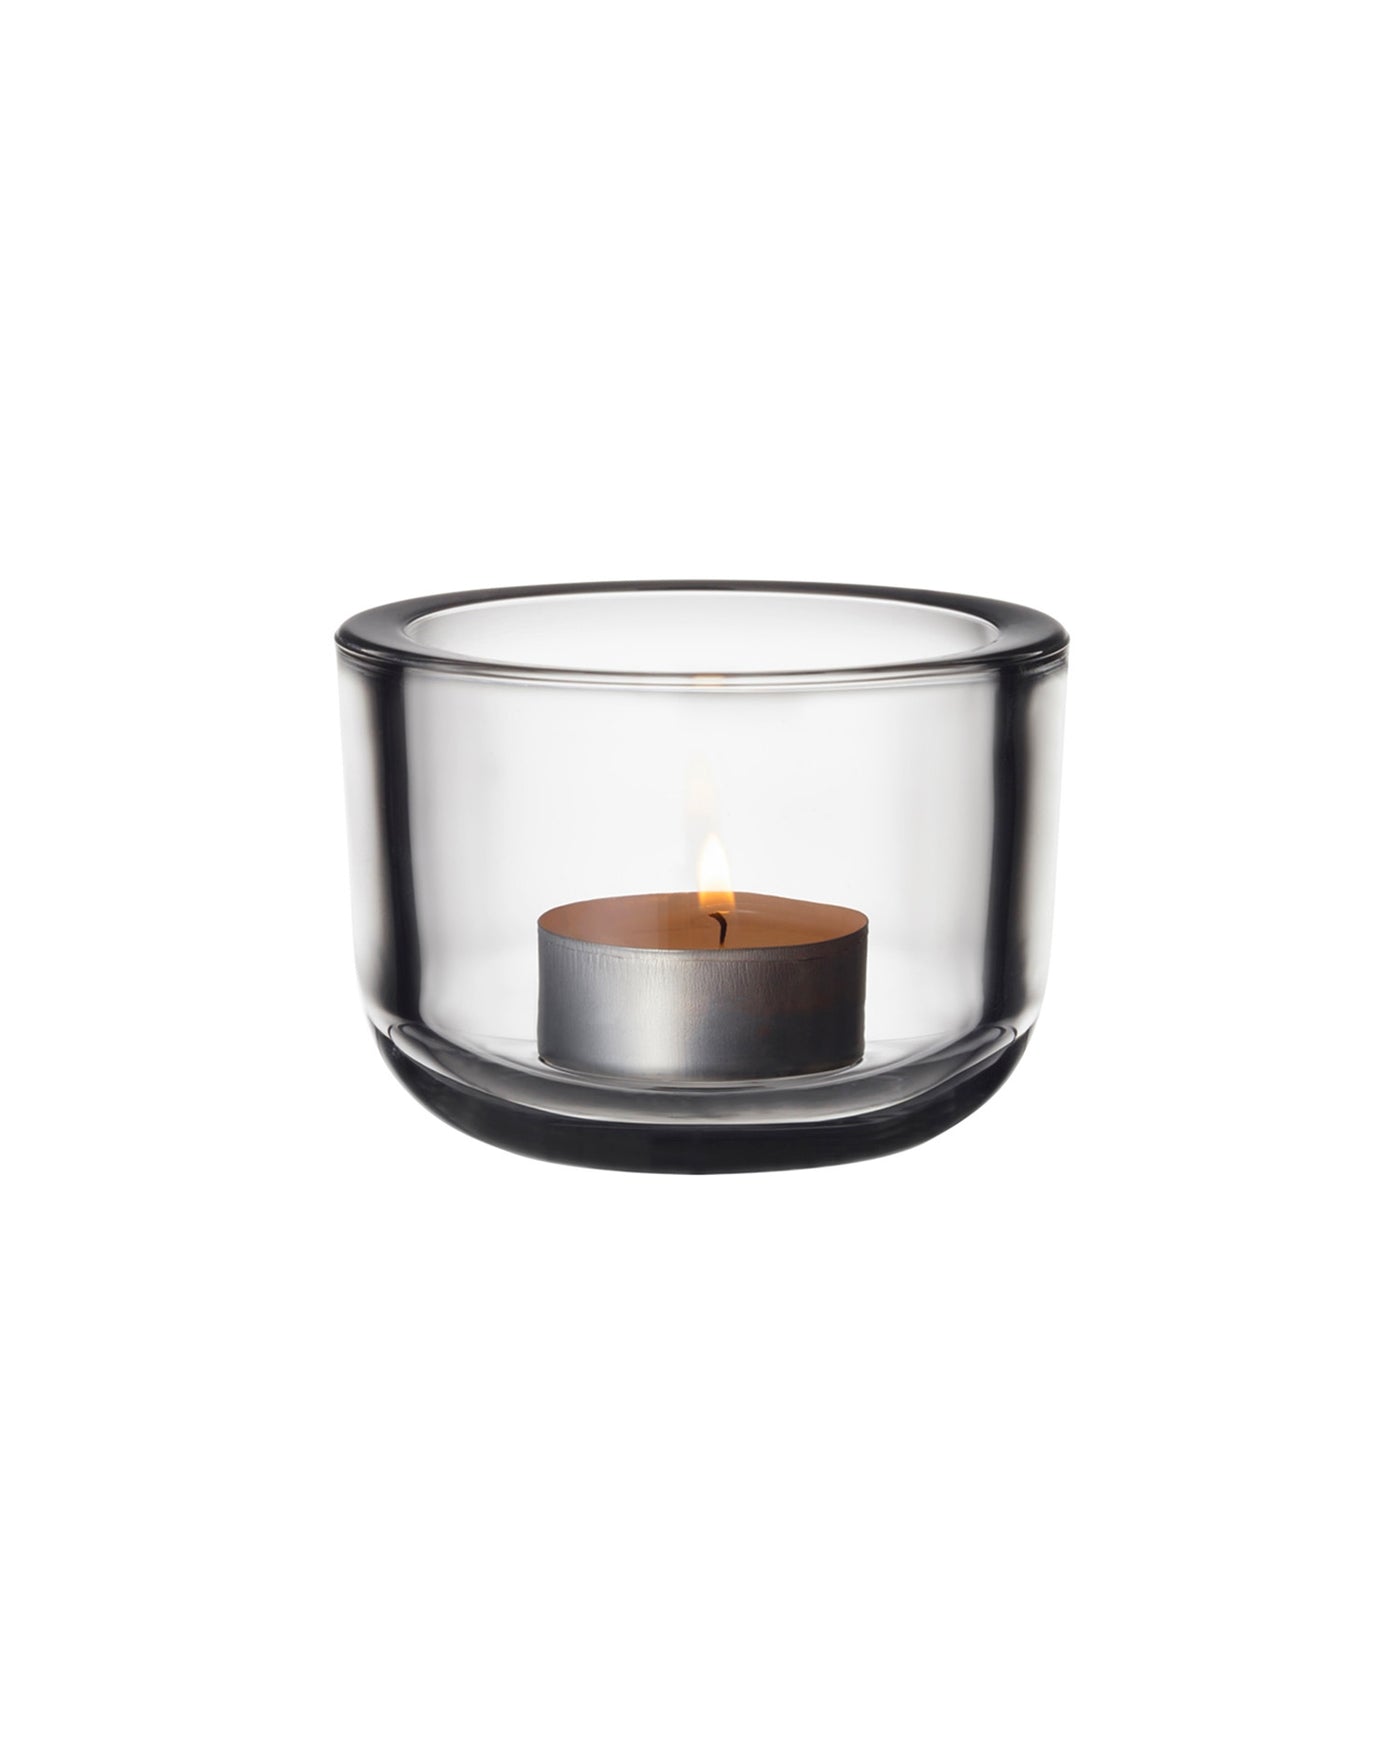 Ultima Thule Tealight Candleholder, Clear